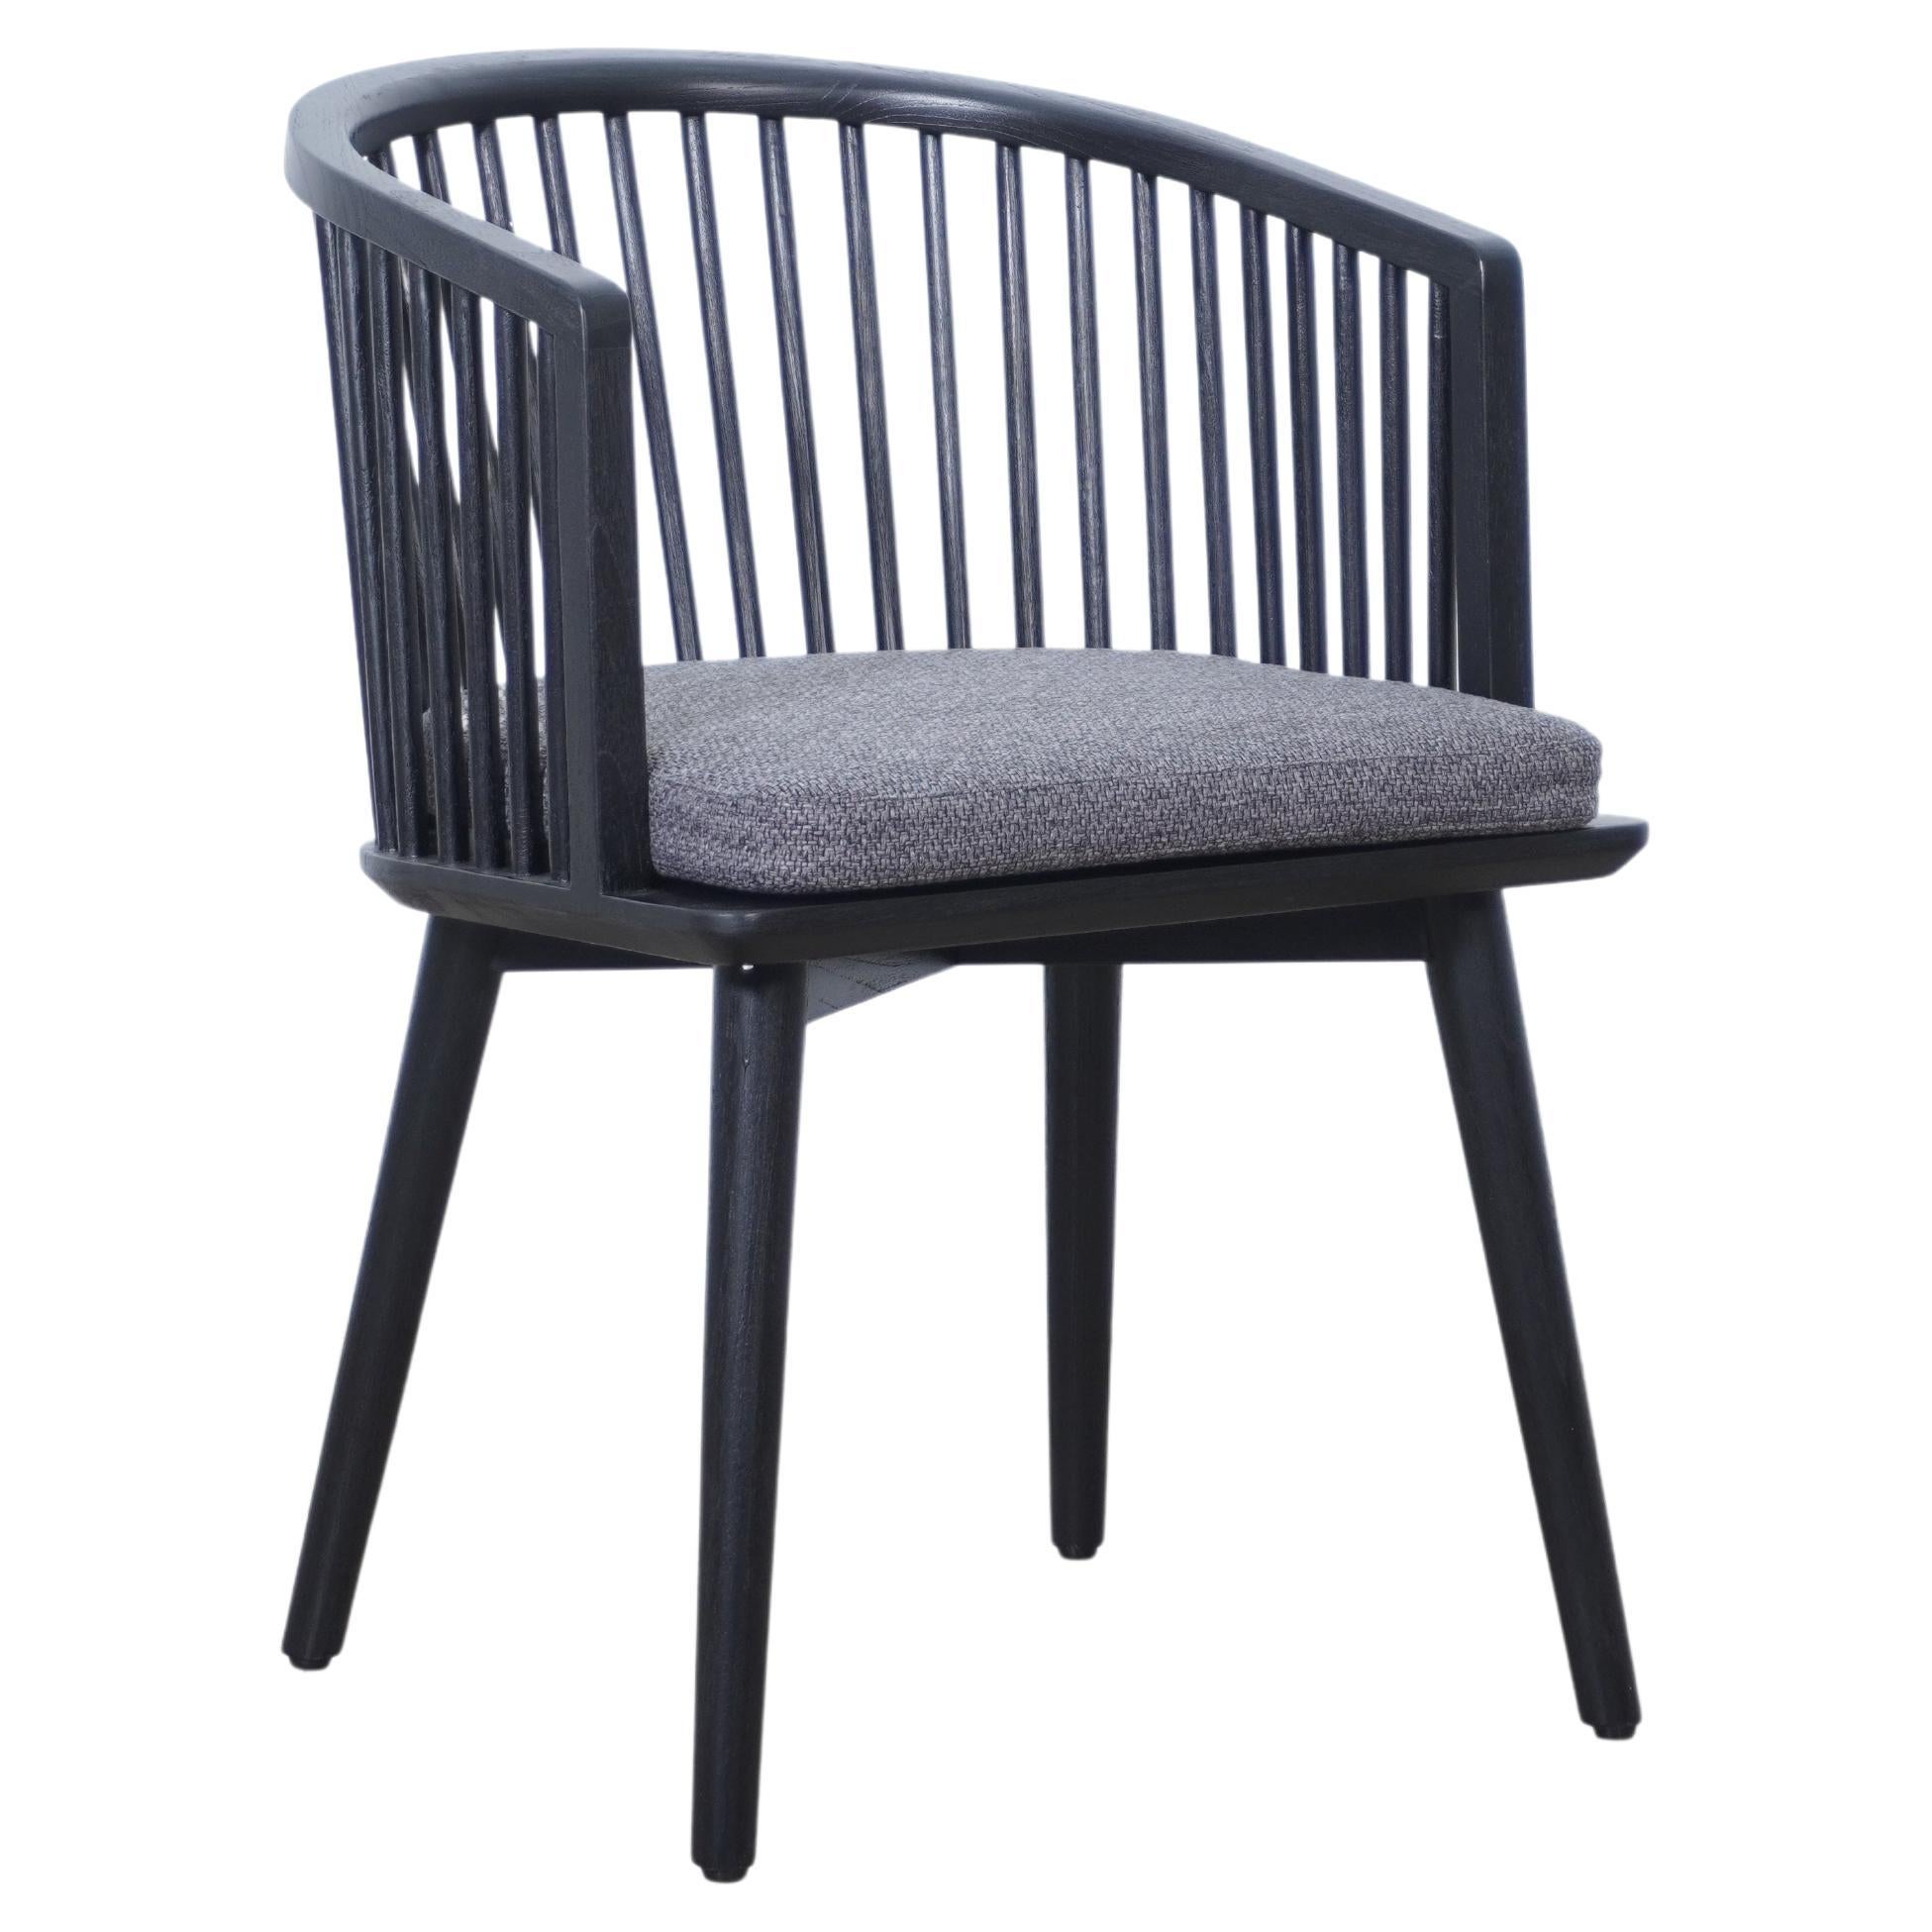 Modern Danish Peasant Dining Chair, Teak in Black Finish. Set of 6 chairs For Sale